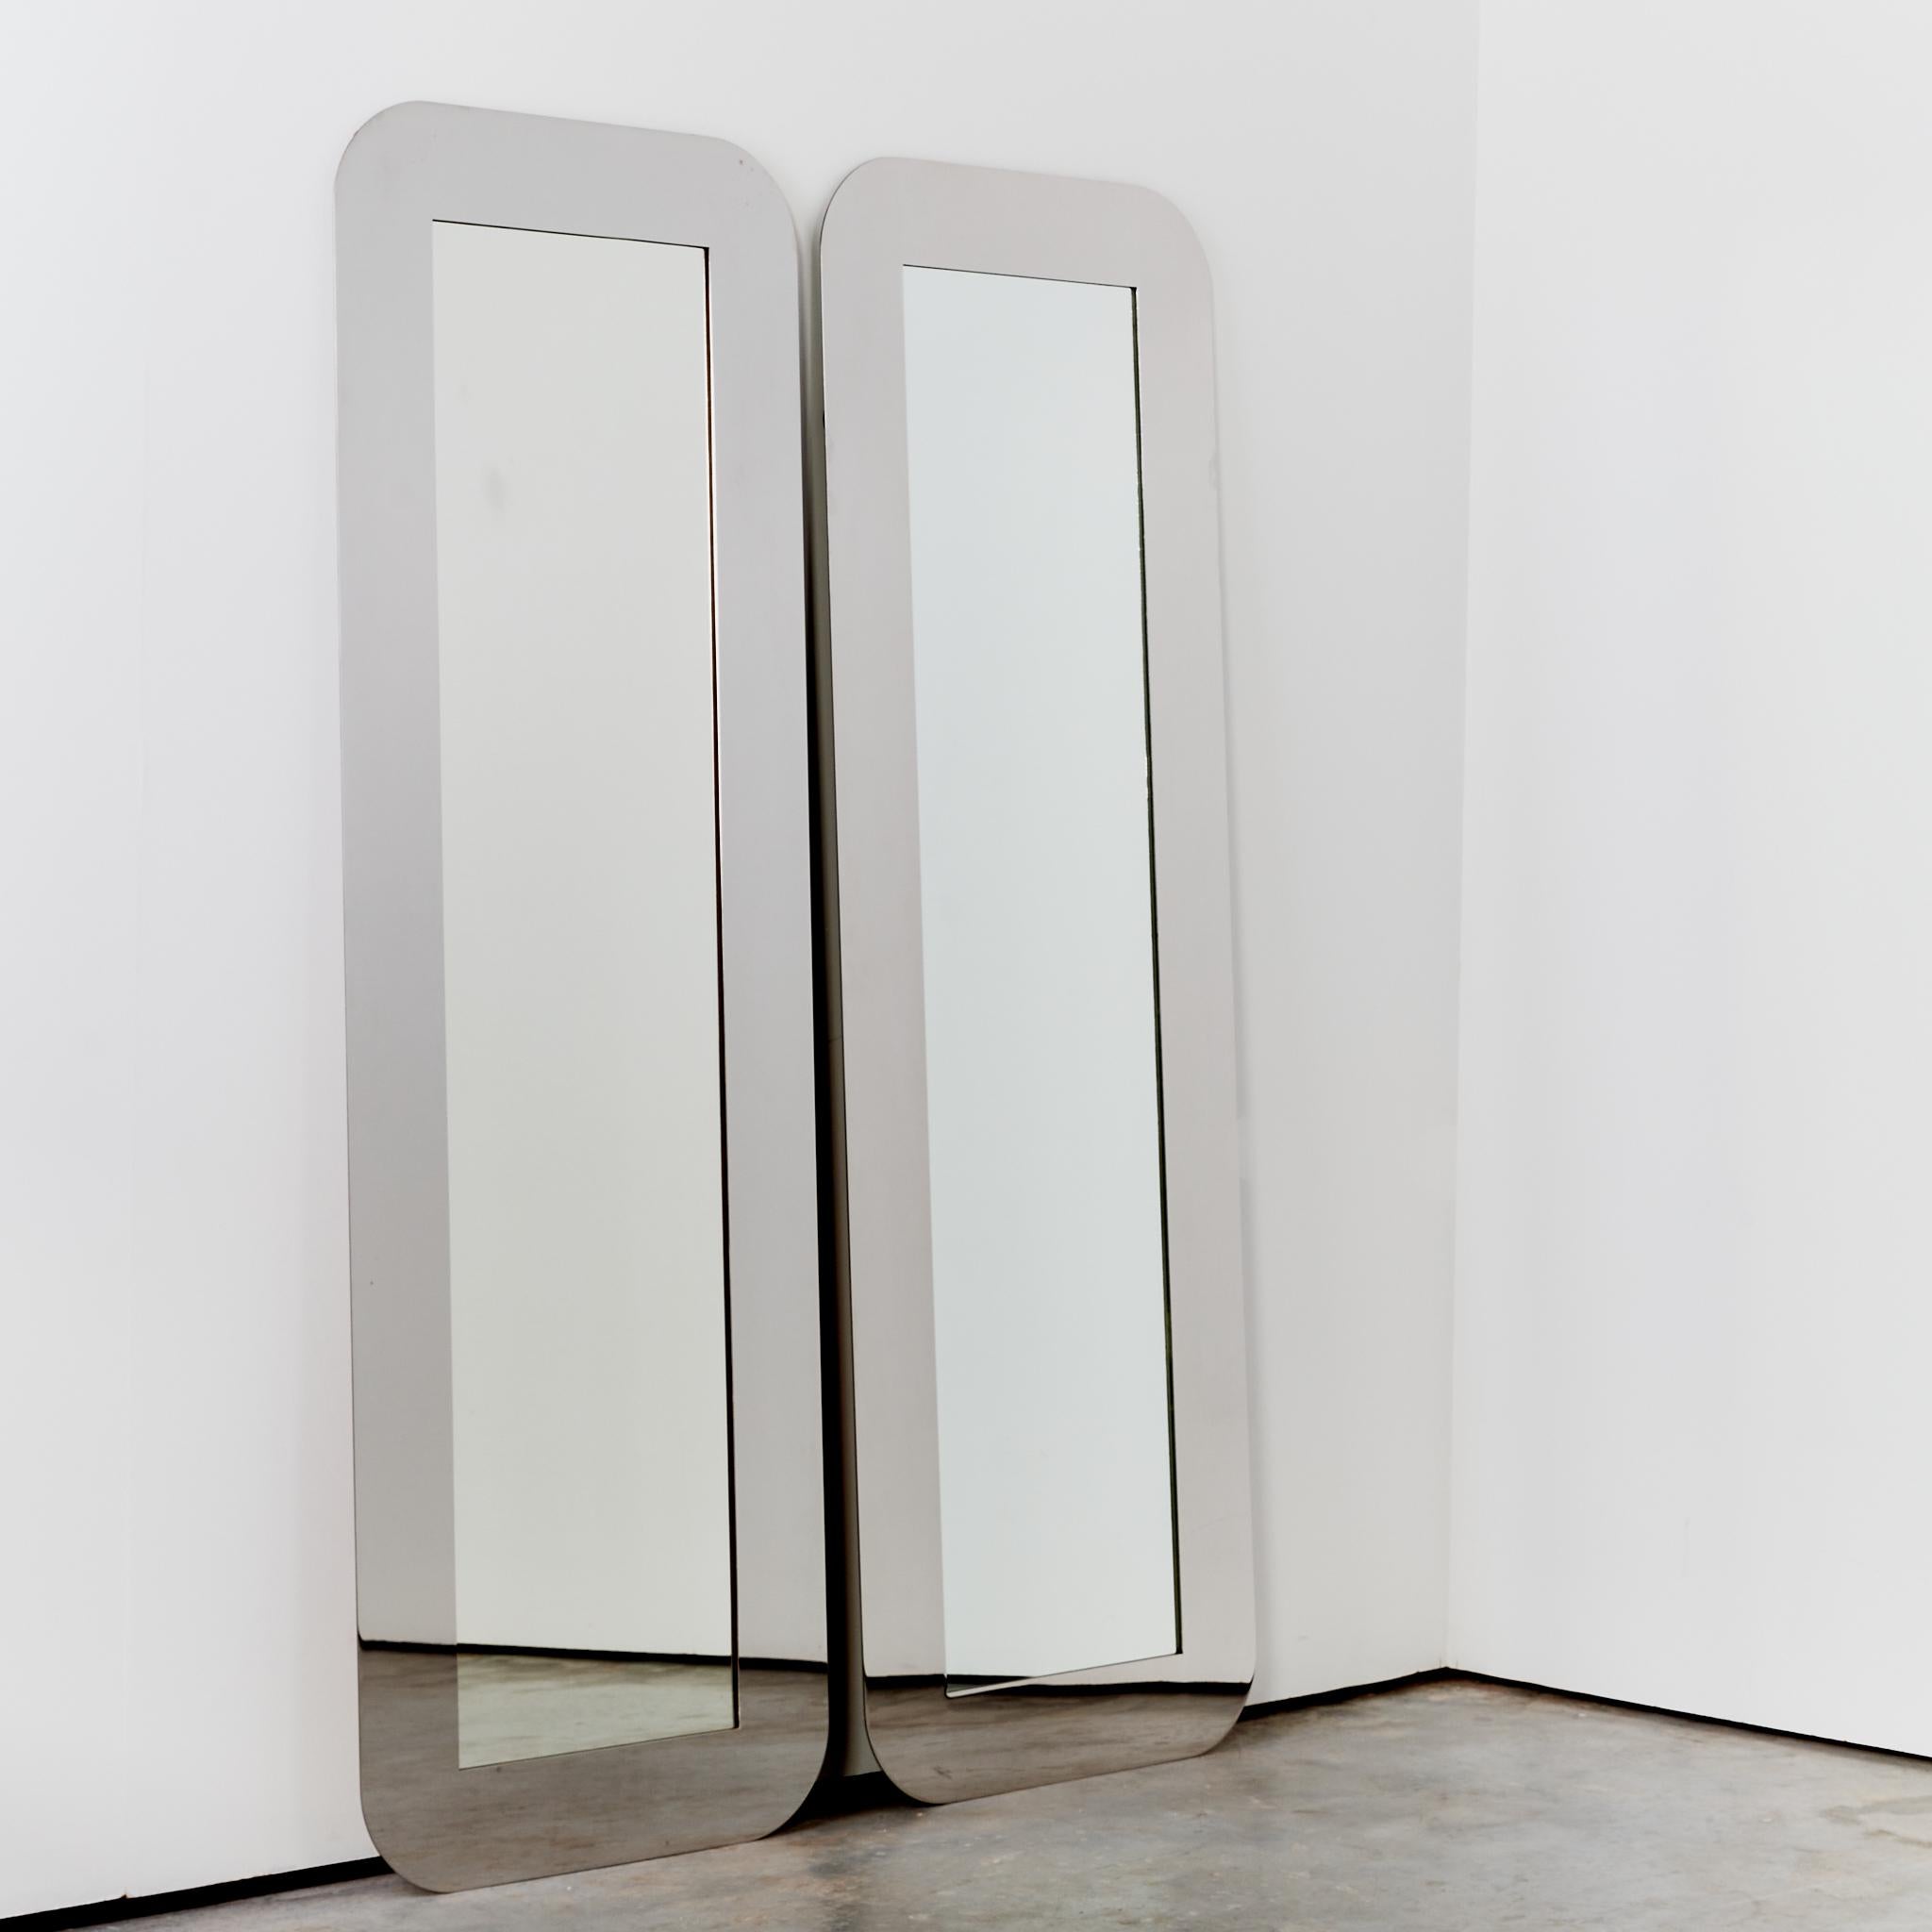 Mirolunga steel frame mirrors by Giuliana Gramigna. Each with a rear hanging system for either vertical or horizontal wall mounting.

Sold separately. Left hand mirror only remaining.

Origin: Italy

Period: 1970's

Designer: Giuliana